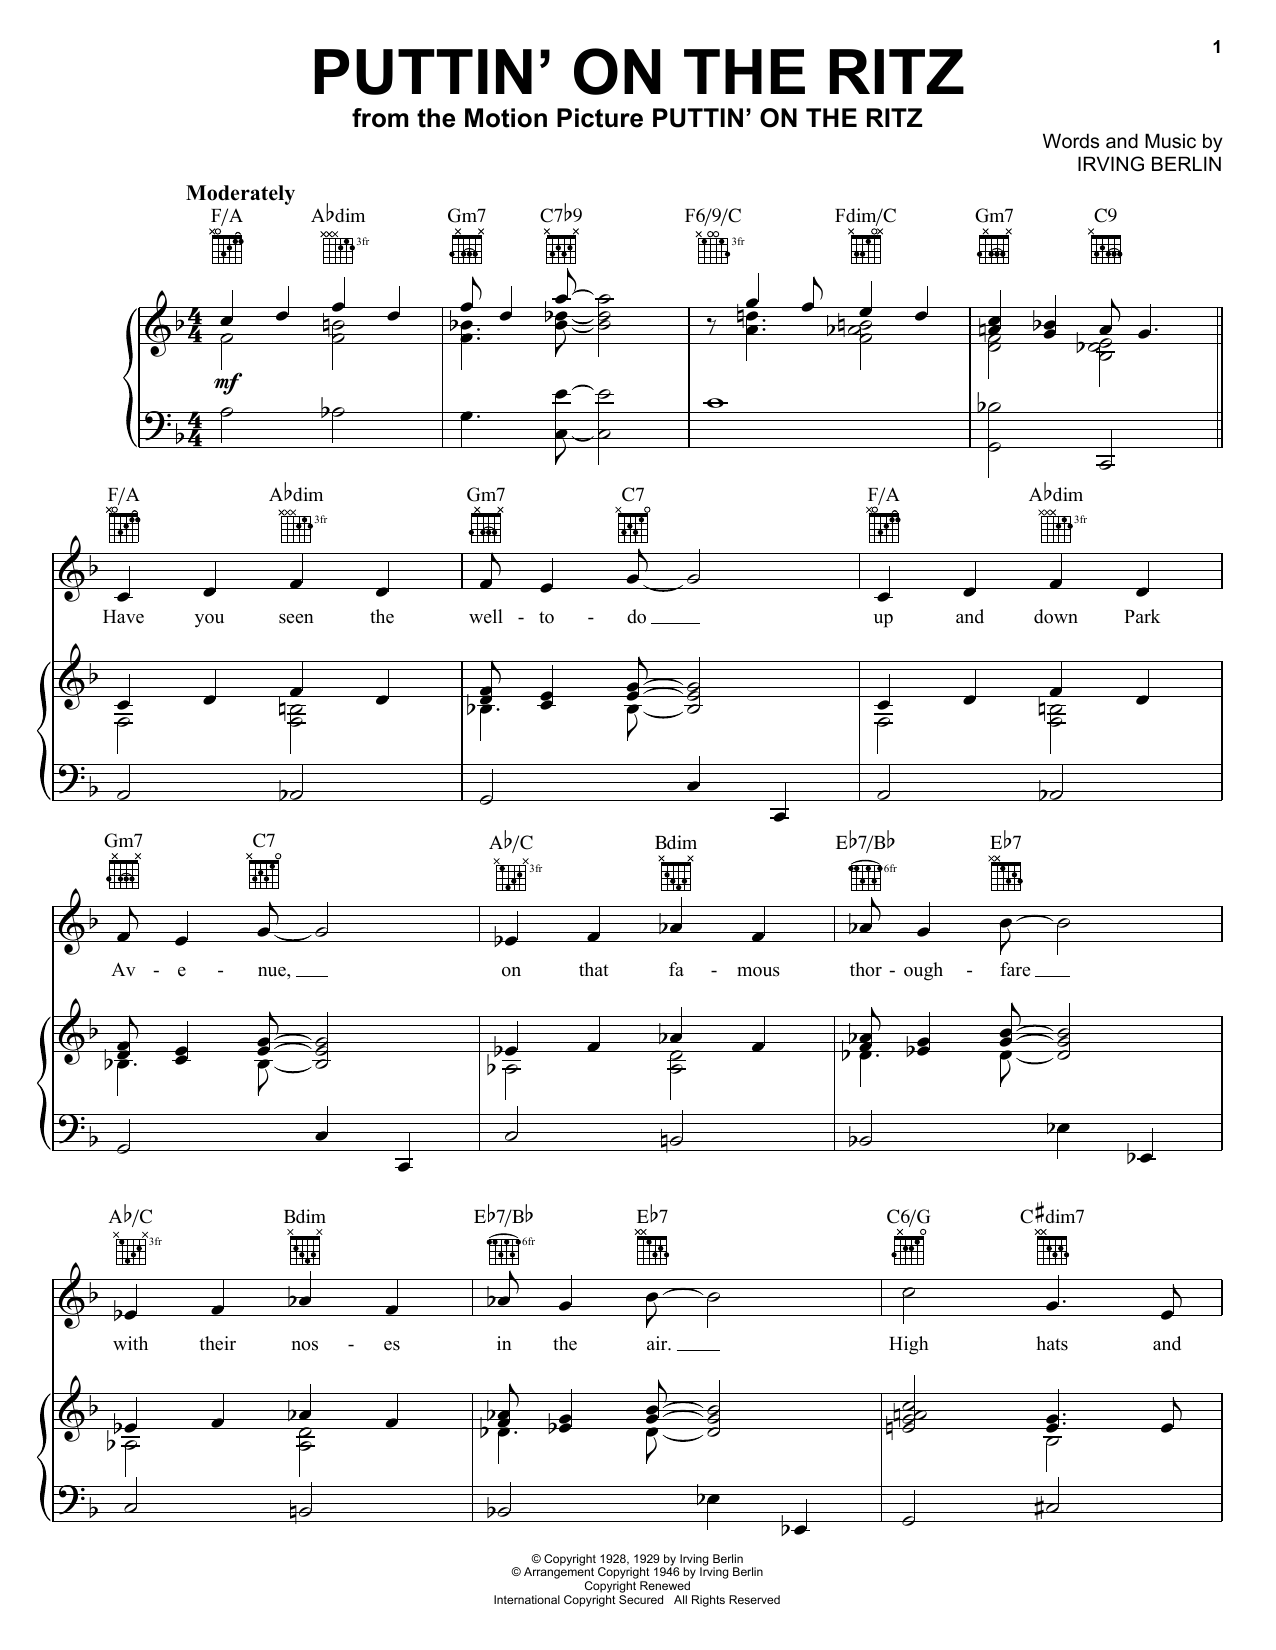 Irving Berlin Puttin' On The Ritz sheet music notes and chords. Download Printable PDF.